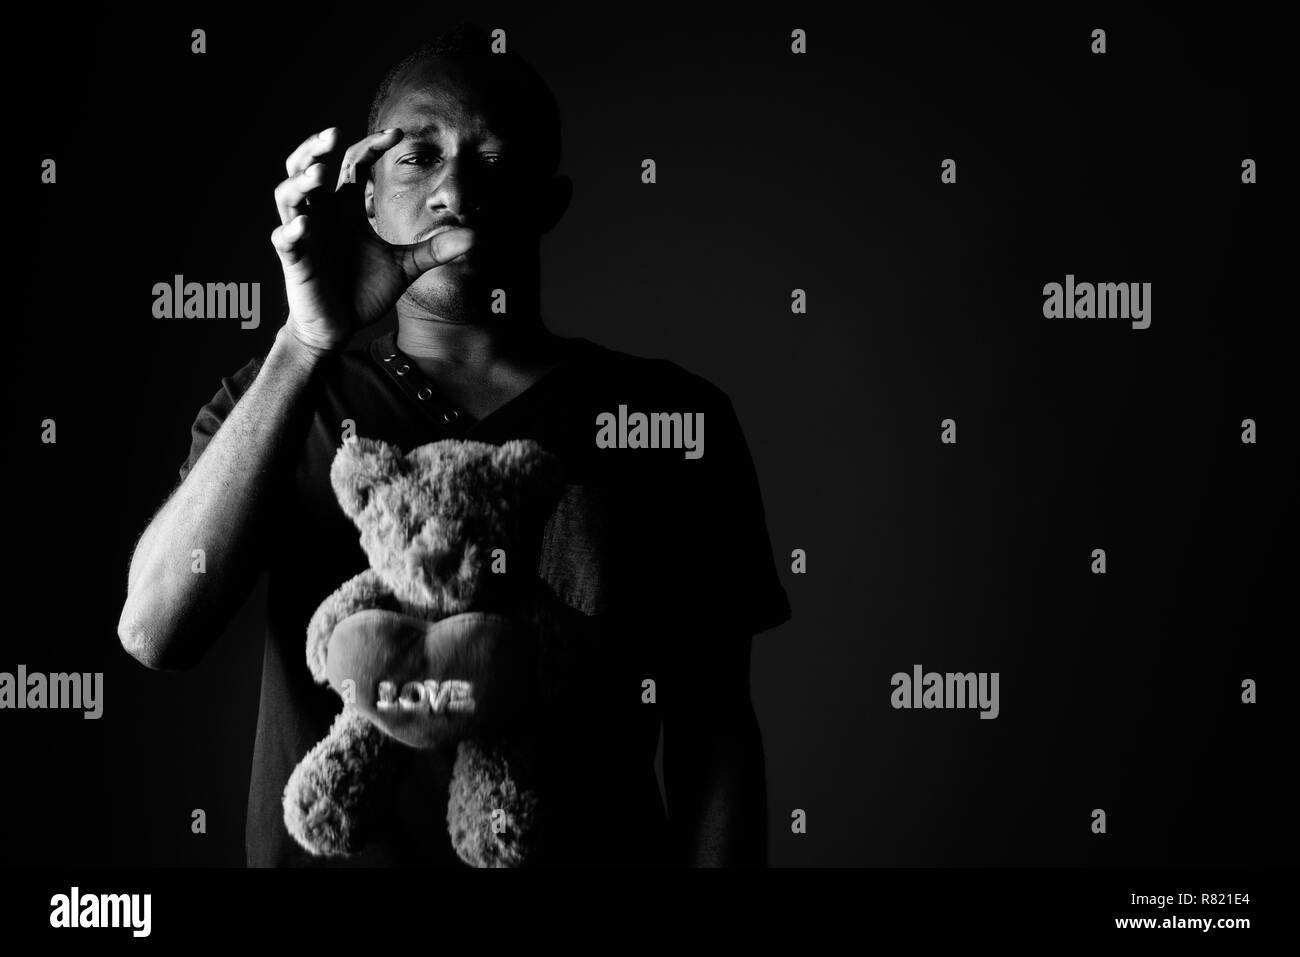 Sad depressed young African man with teddy bear and love sign text in black and white Stock Photo